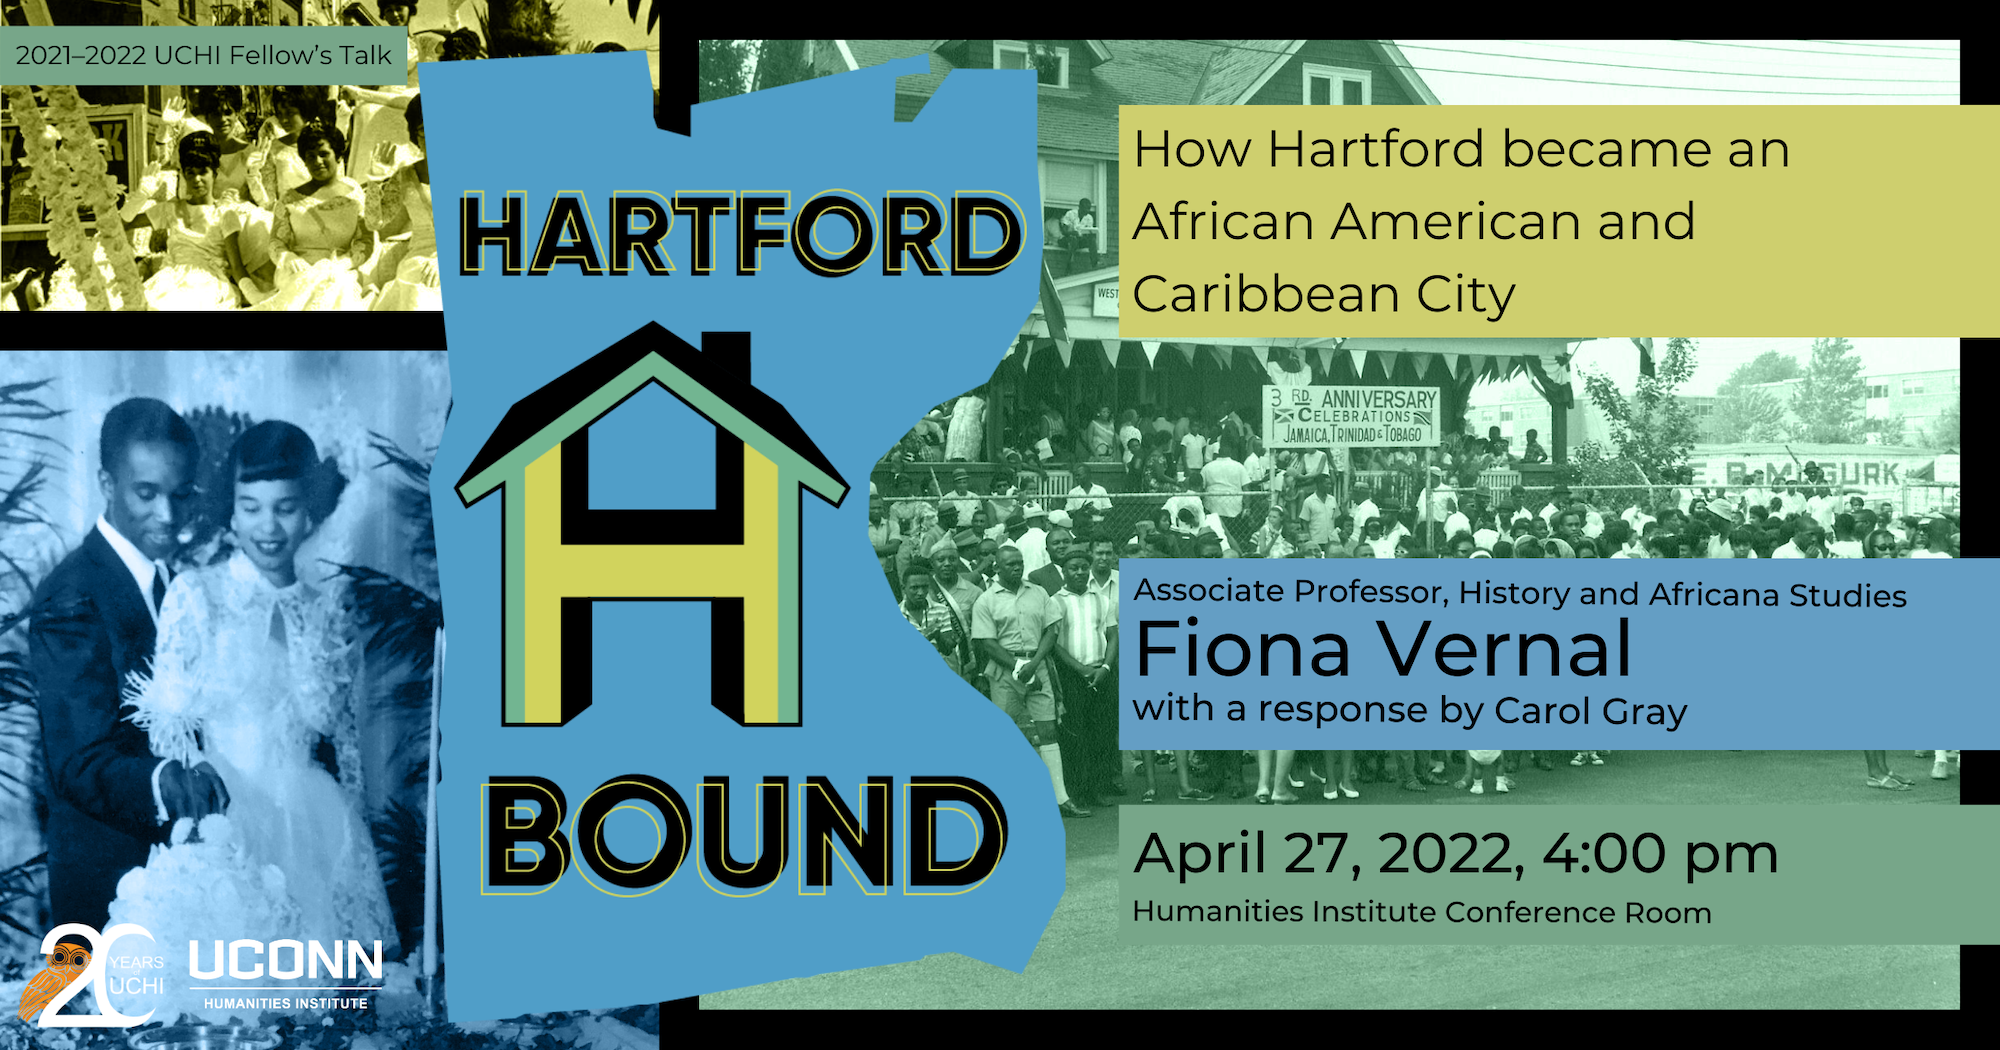 Hartford Bound: How African Became and African American and Caribbean City. Associates Professor of History and Africana Studies Fiona Vernal, with a response by Carol Gray. April 27, 2022, 4:00pm. Humanities Institute Conference Room.